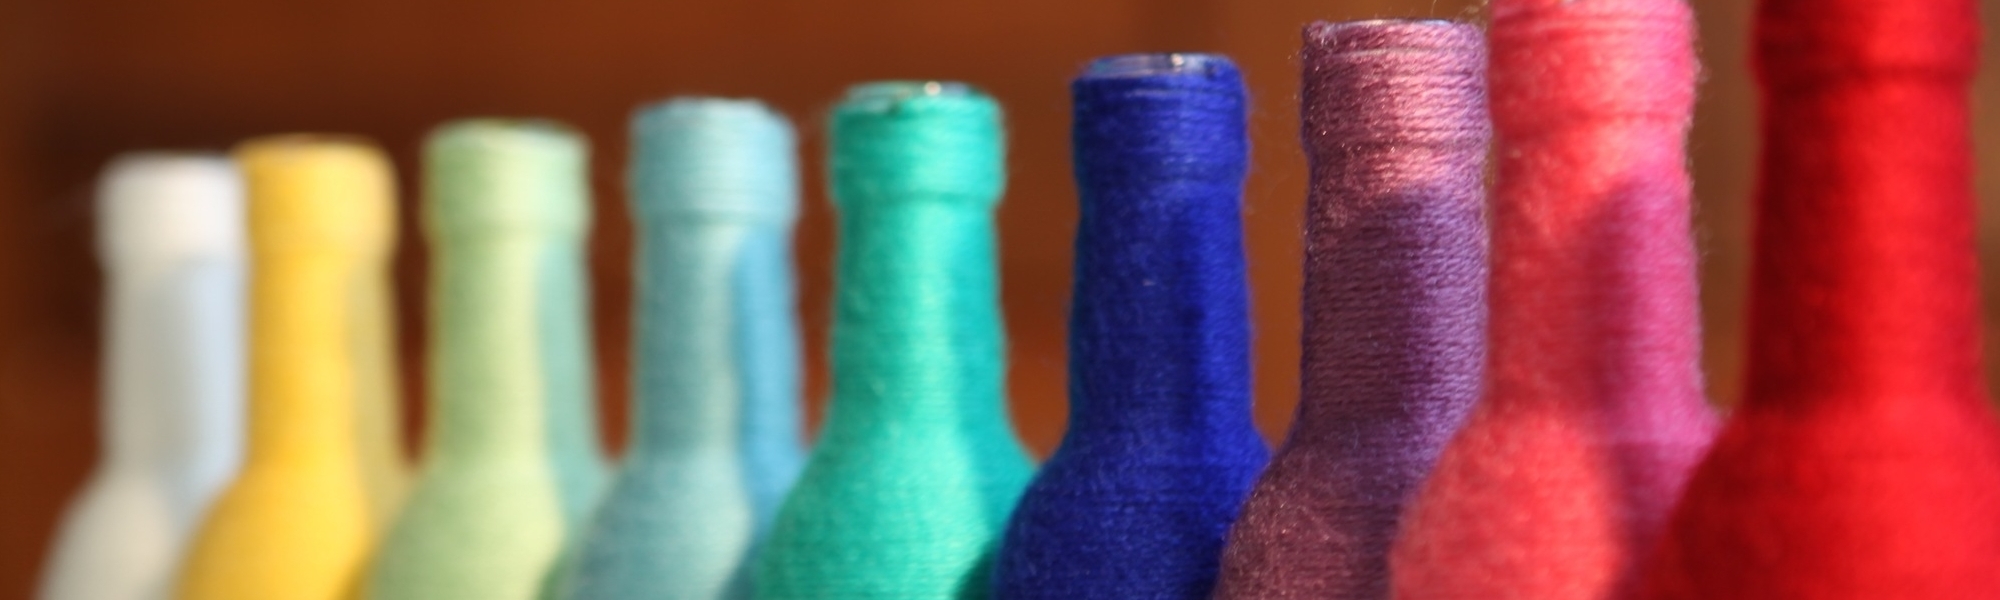 Copy of Wool Coloured Bottles